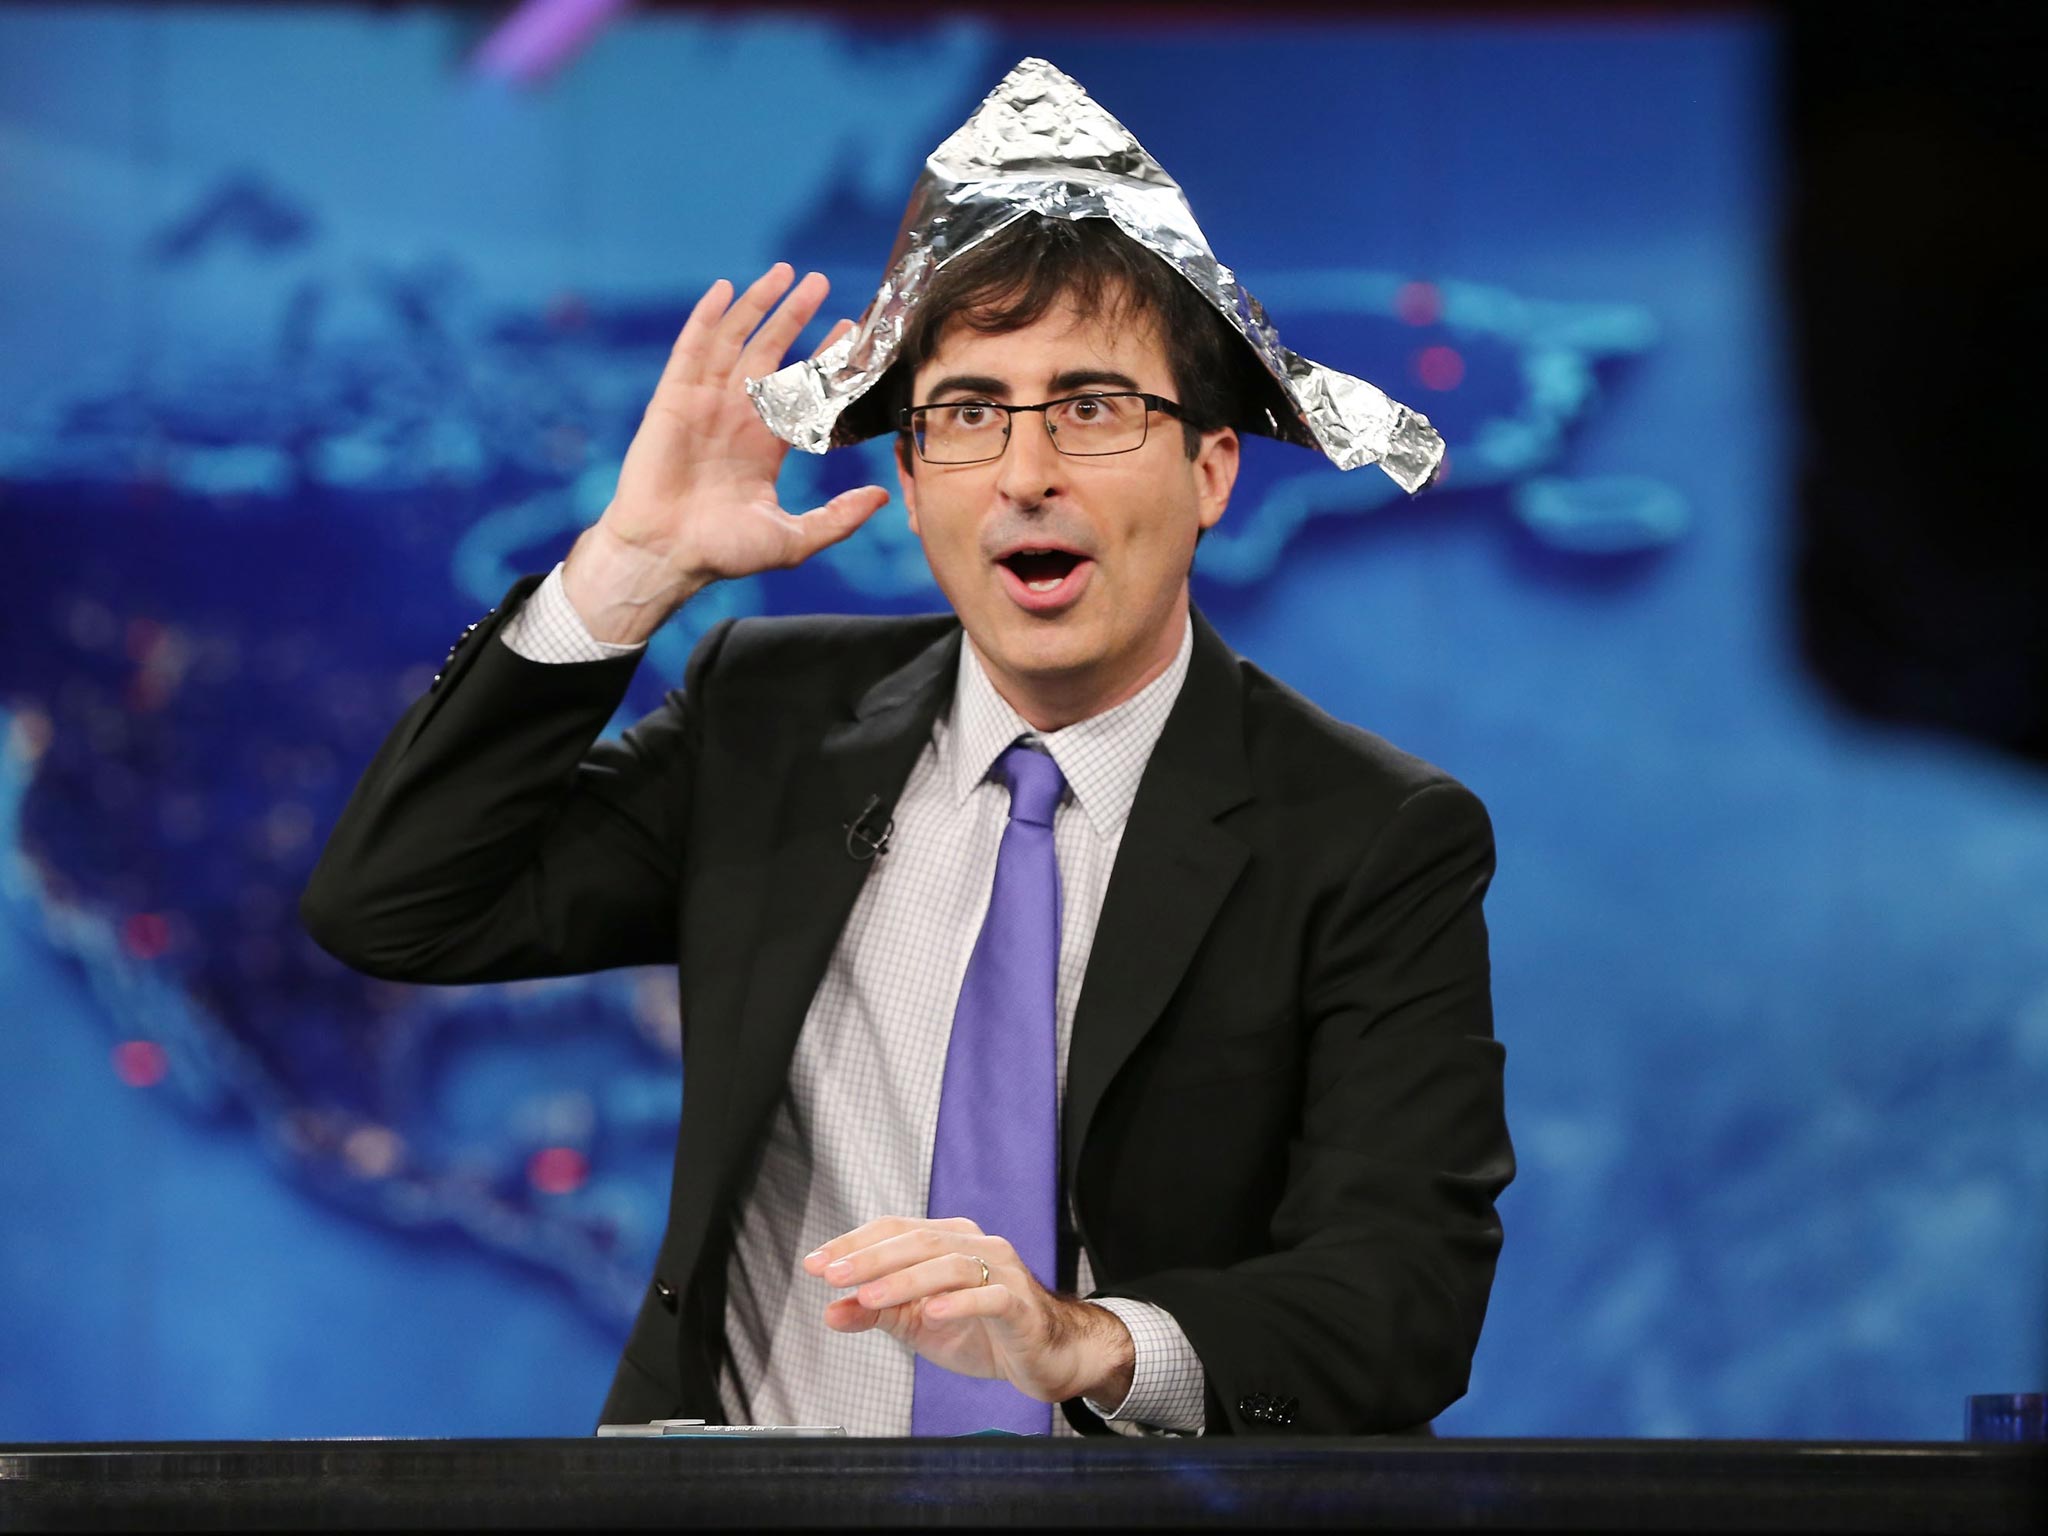 John Oliver, a 37-year-old Birmingham-native, first found US fans as a correspondent on The Daily Show